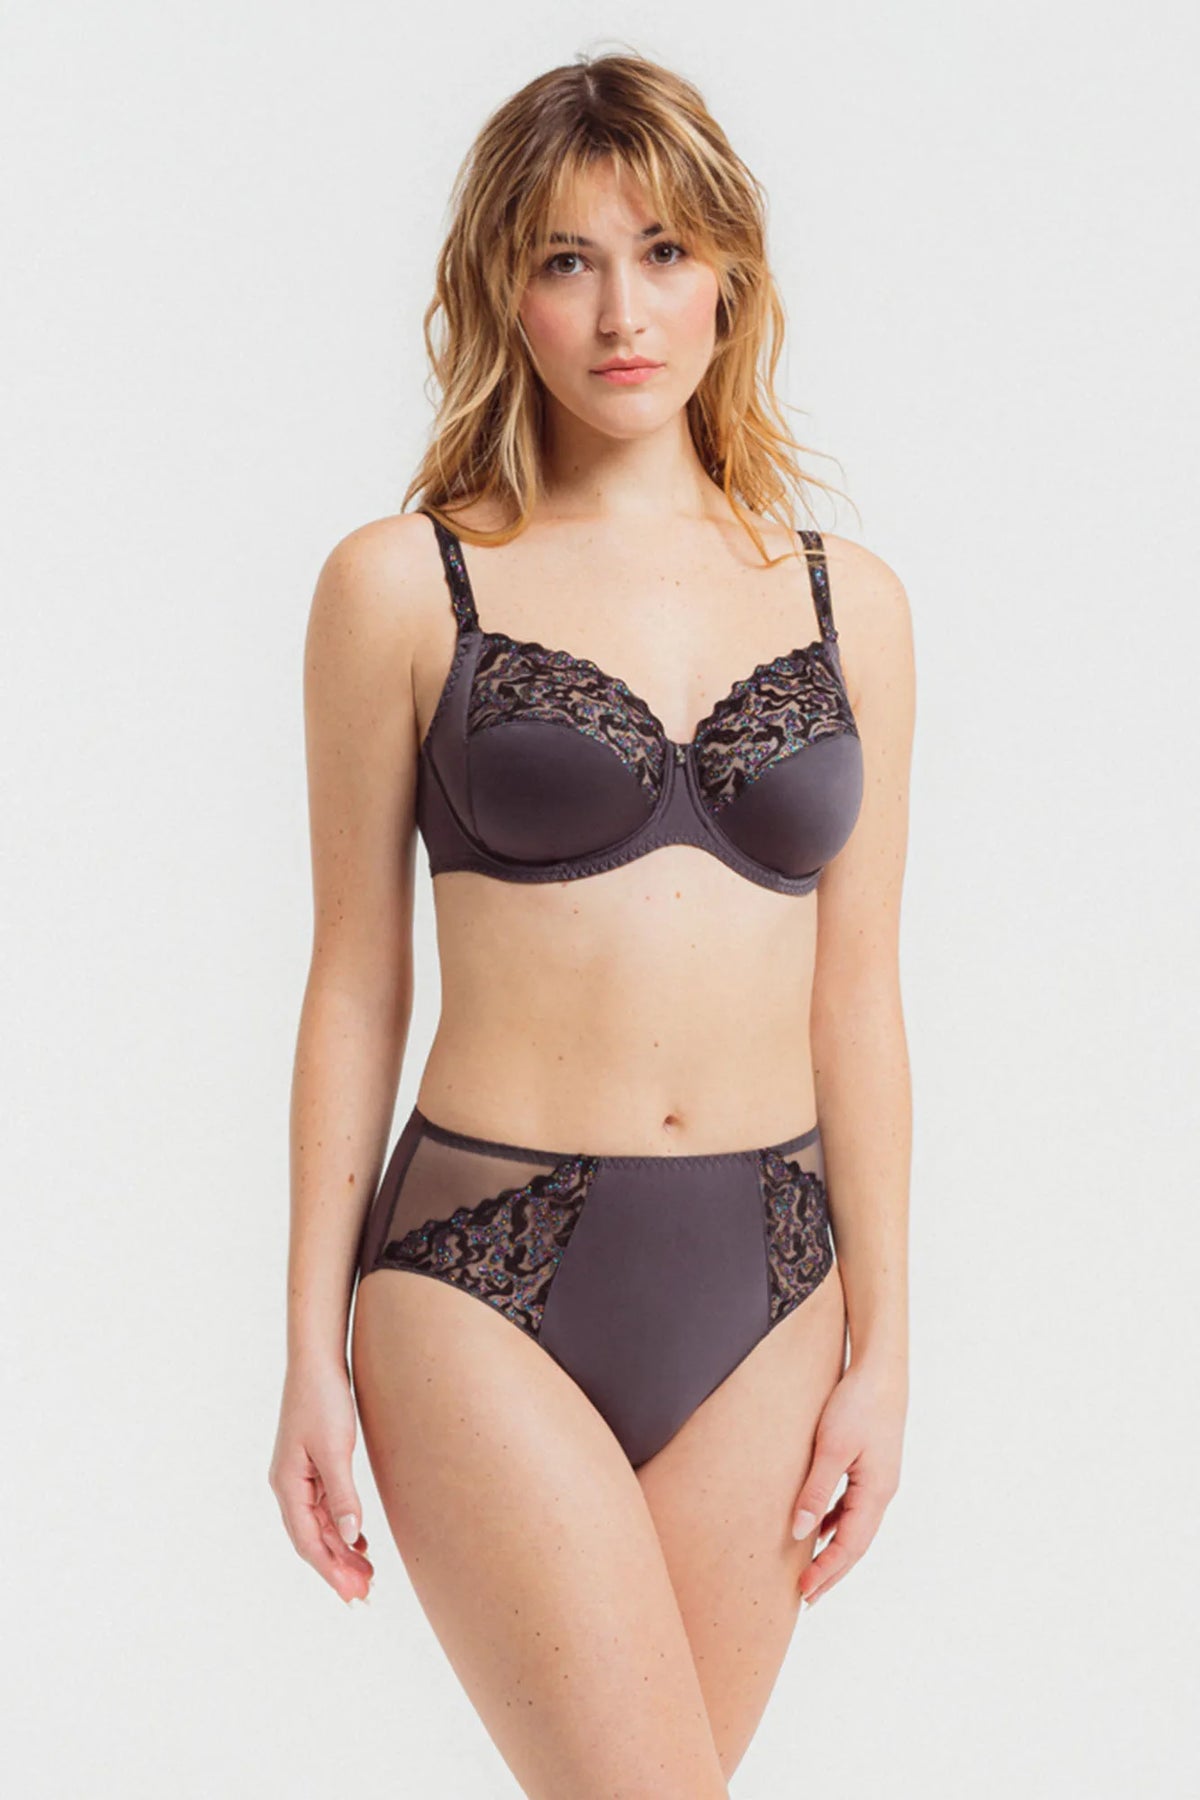 Electric Waves Hipster panty and Full Cup Underwire Bra from Luisa Bracq at Belle Lacet Lingerie